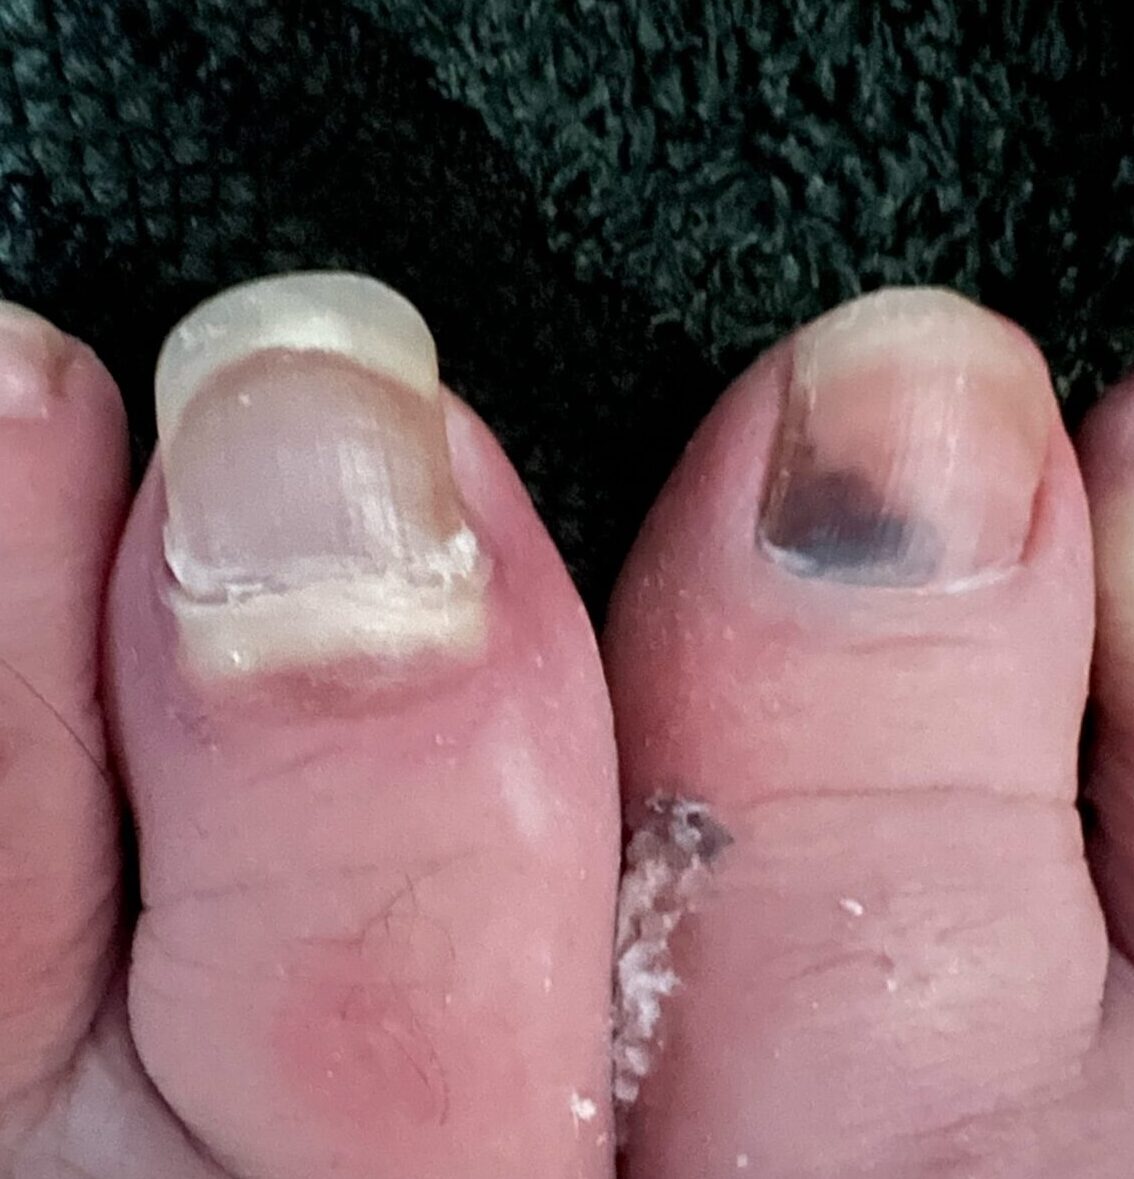 close up of big toes showing bruising